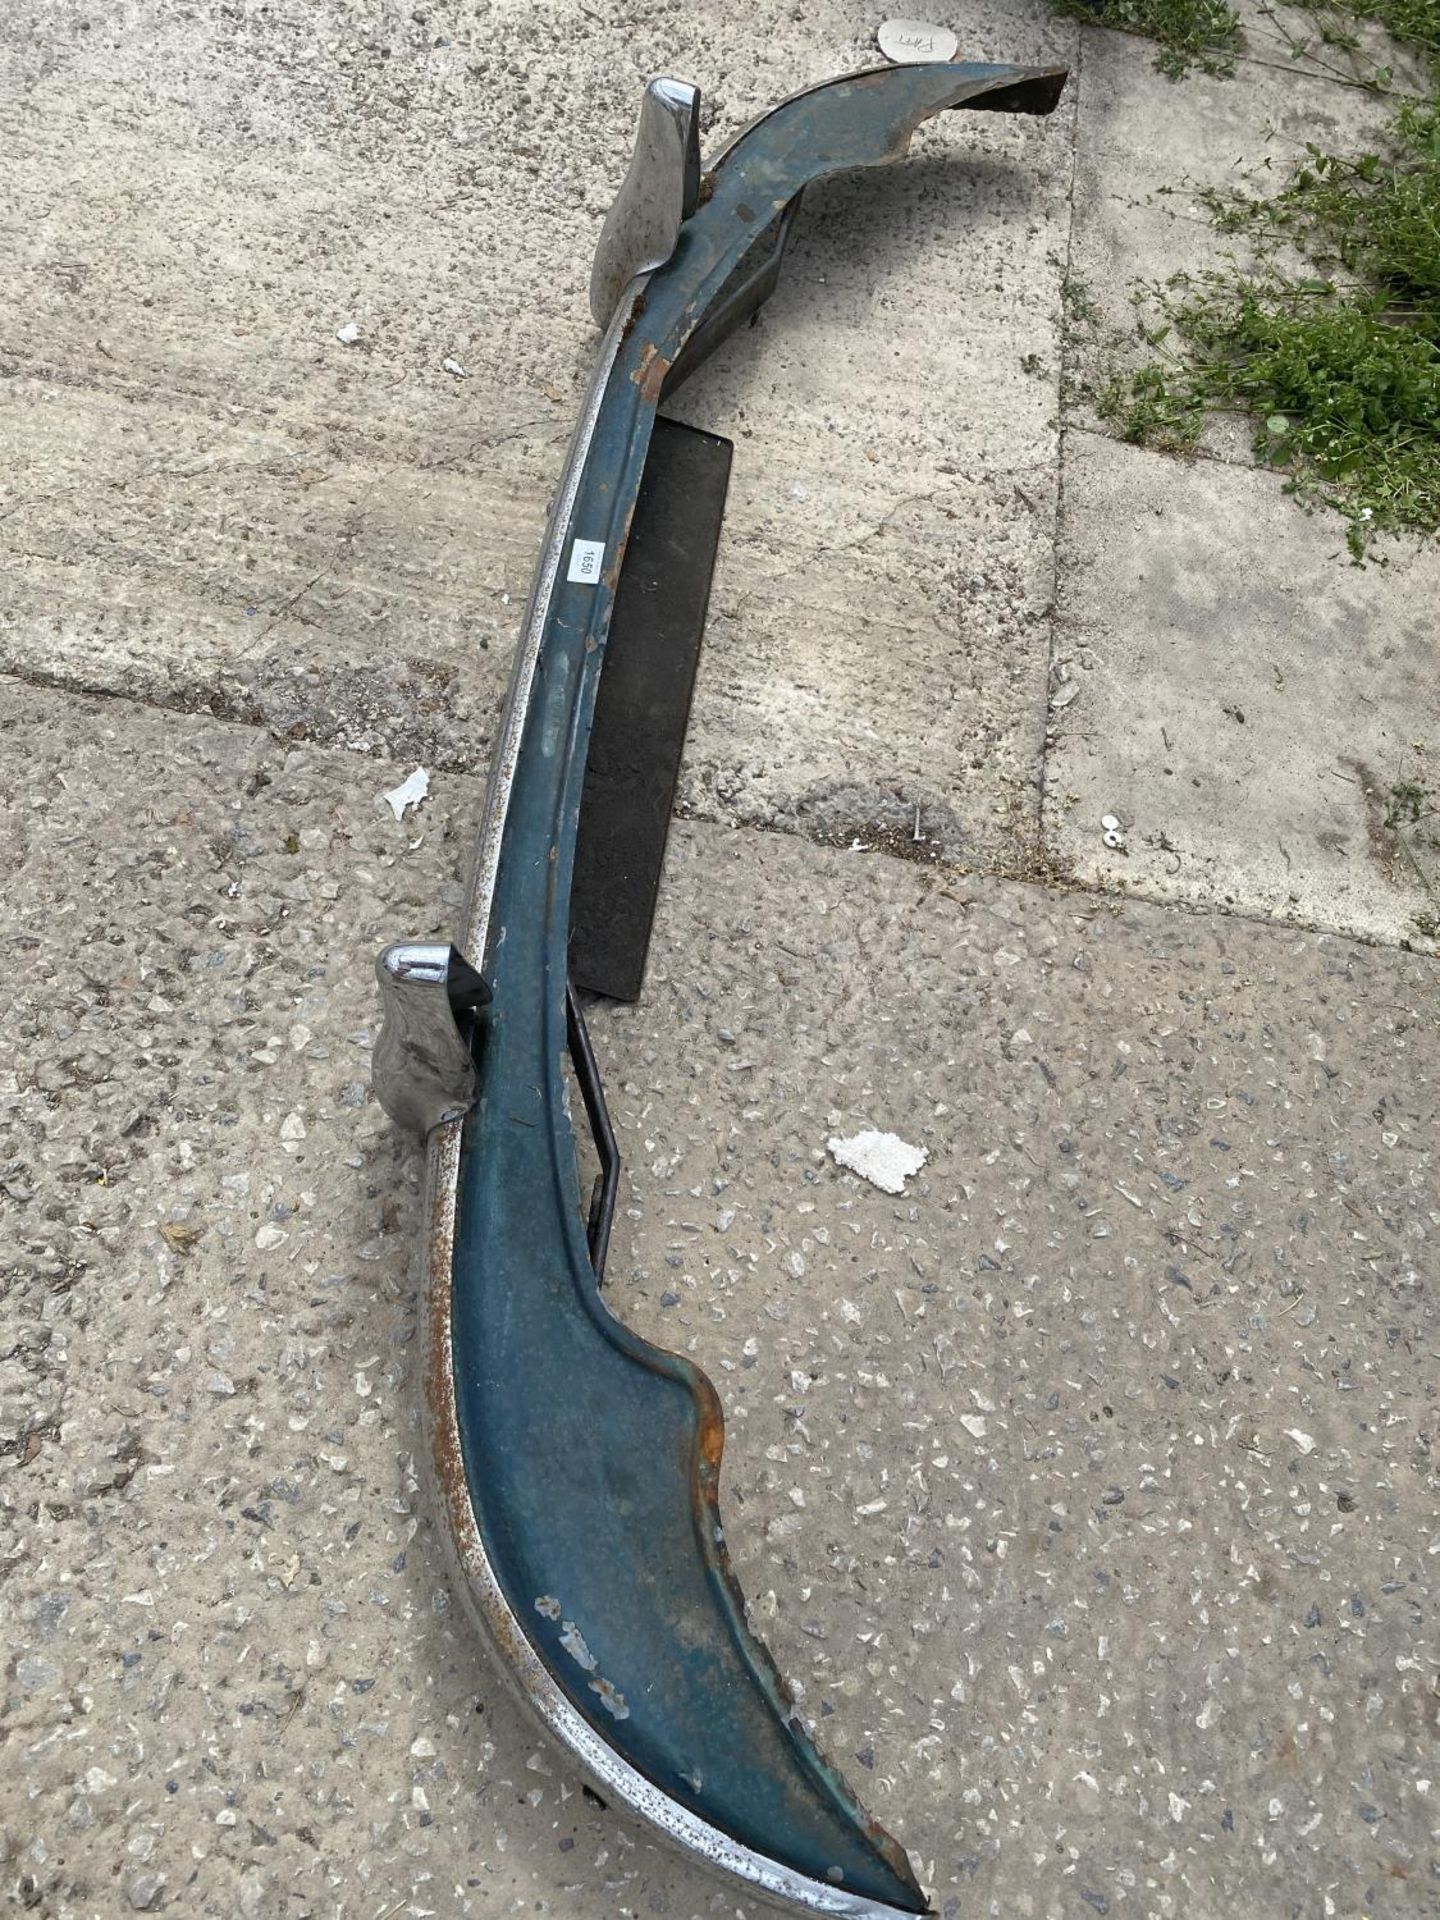 A CHROME CAR BUMPER BELIEVED TO BE FROM A MORRIS MINOR - Image 5 of 6